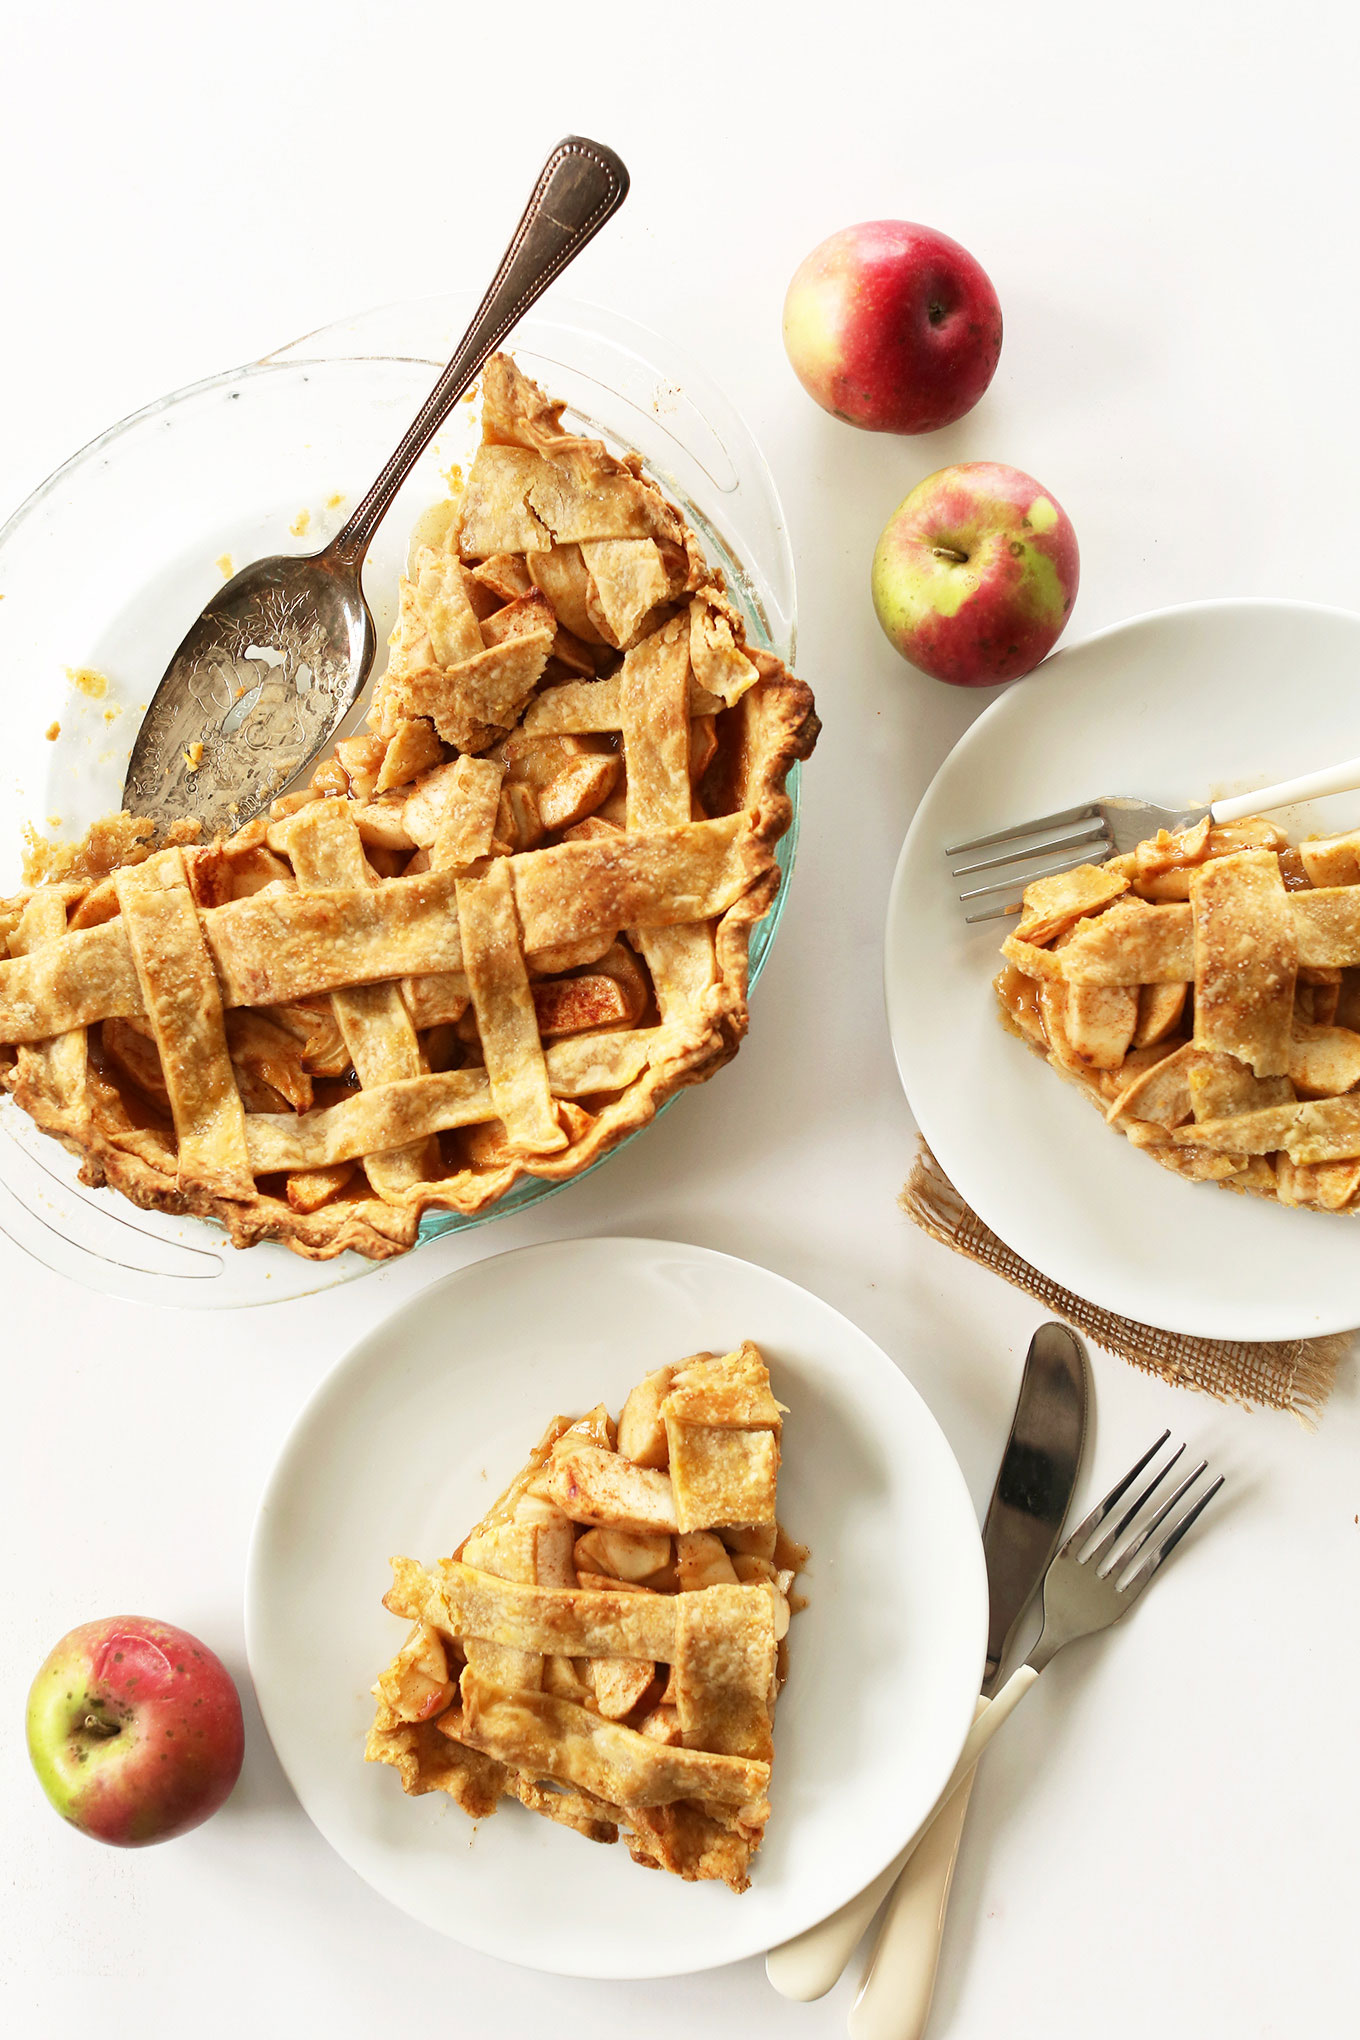 Plates with slices of vegan apple pie alongside the rest of the pie